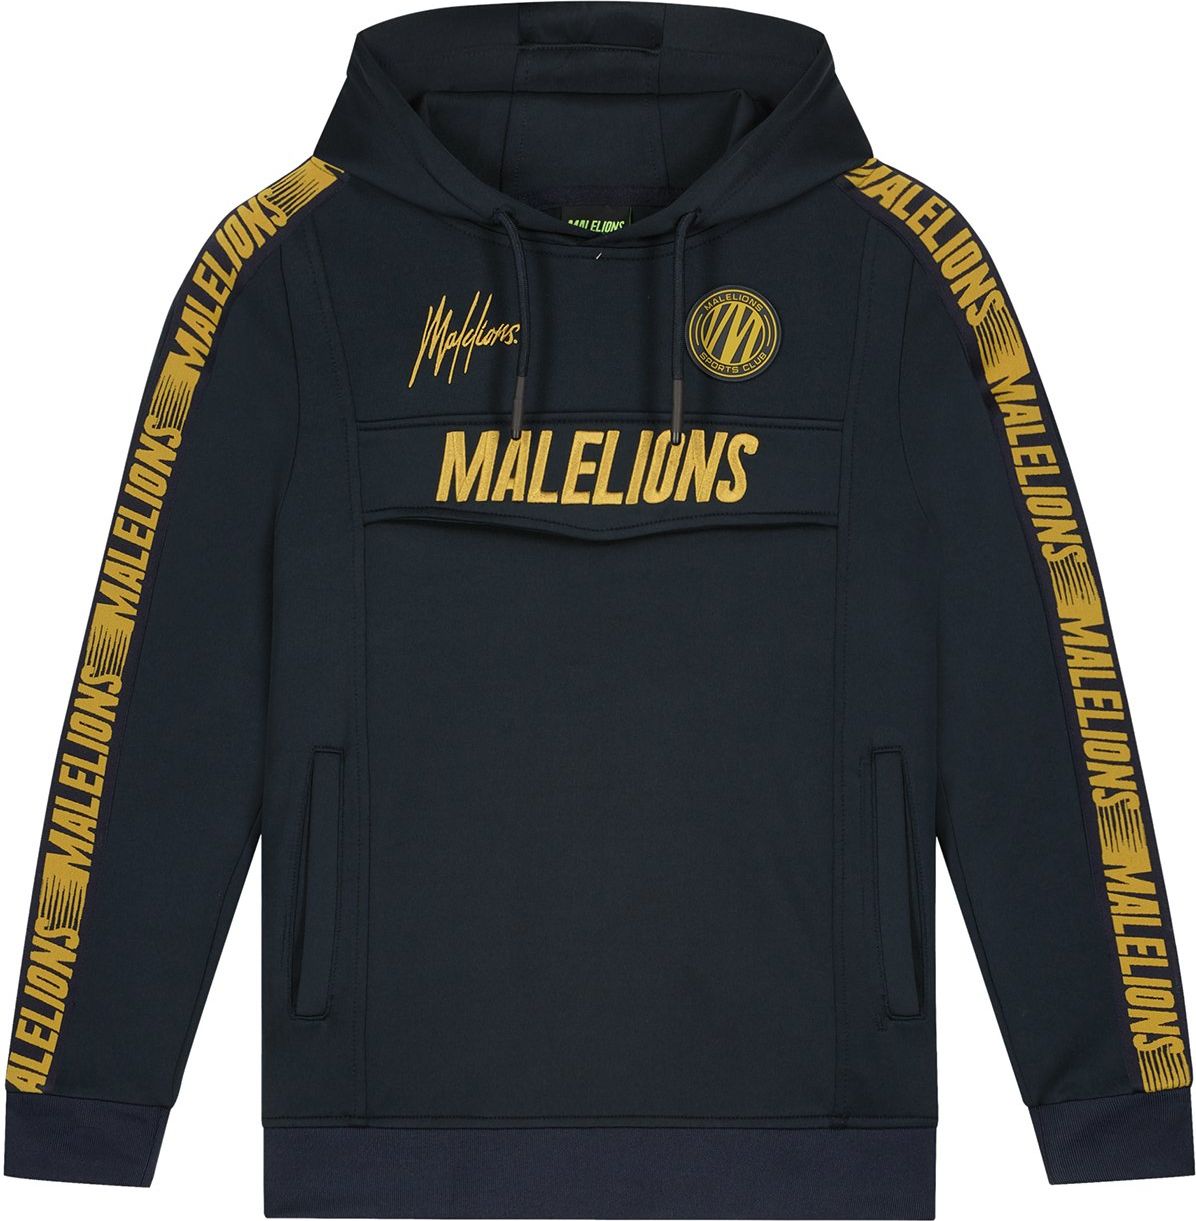 Malelions Warming Up Tracksuit - Navy/Gold Blauw